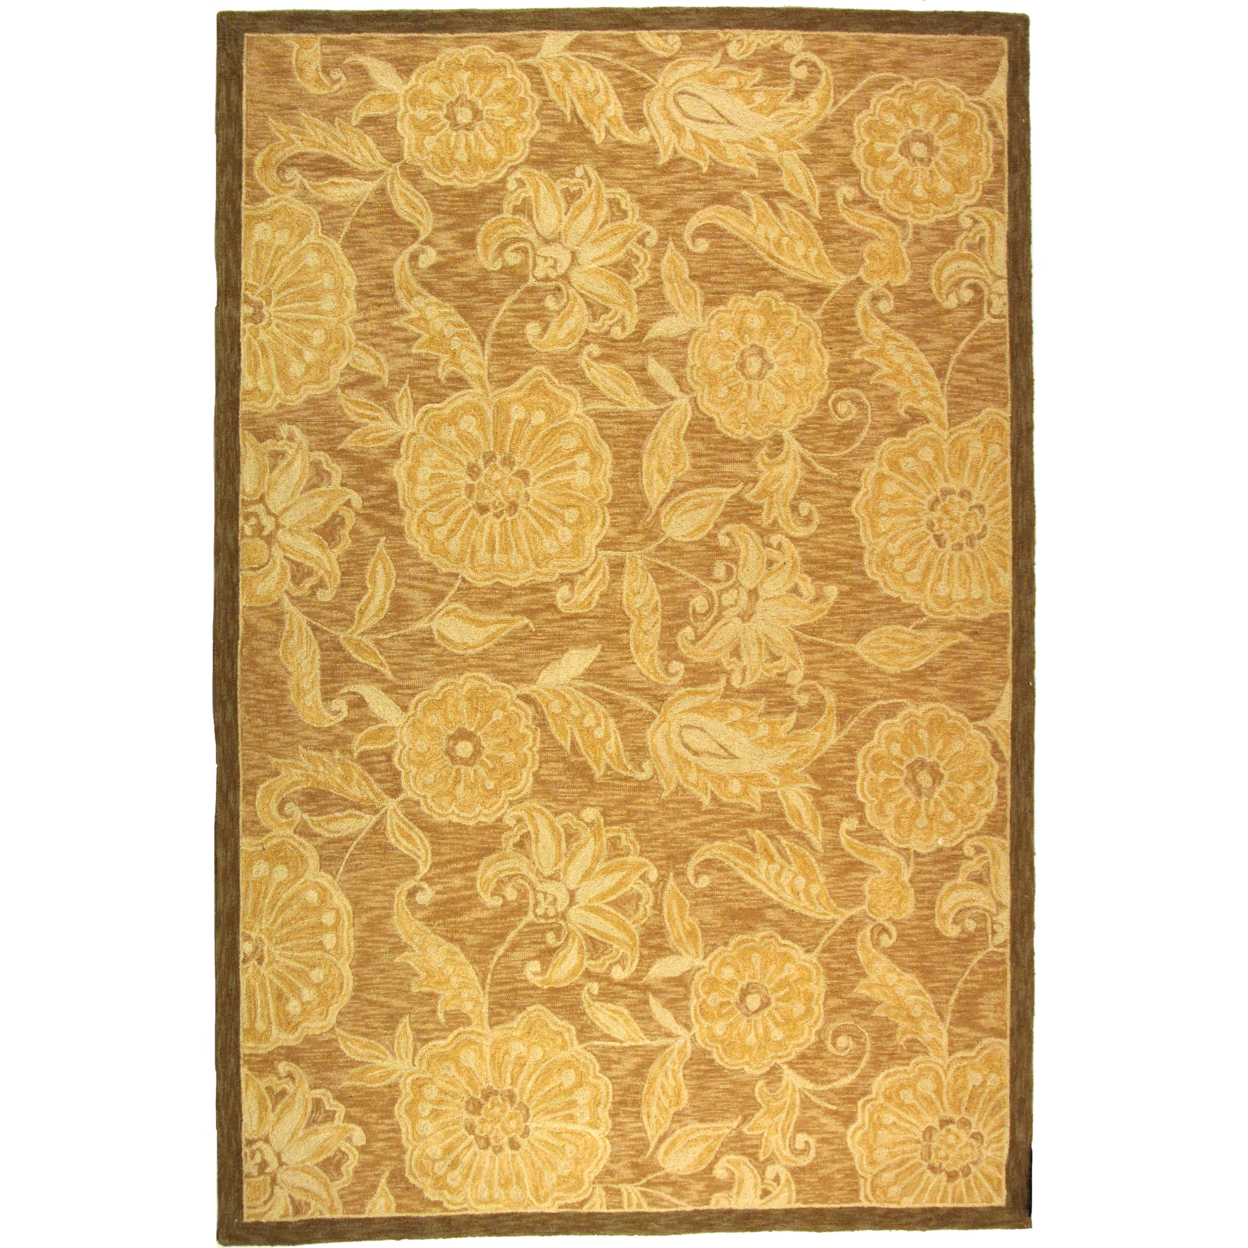 SAFAVIEH Chelsea HK156A Hand-hooked Light Brown Rug - 4' 6 X 6' 6 Oval